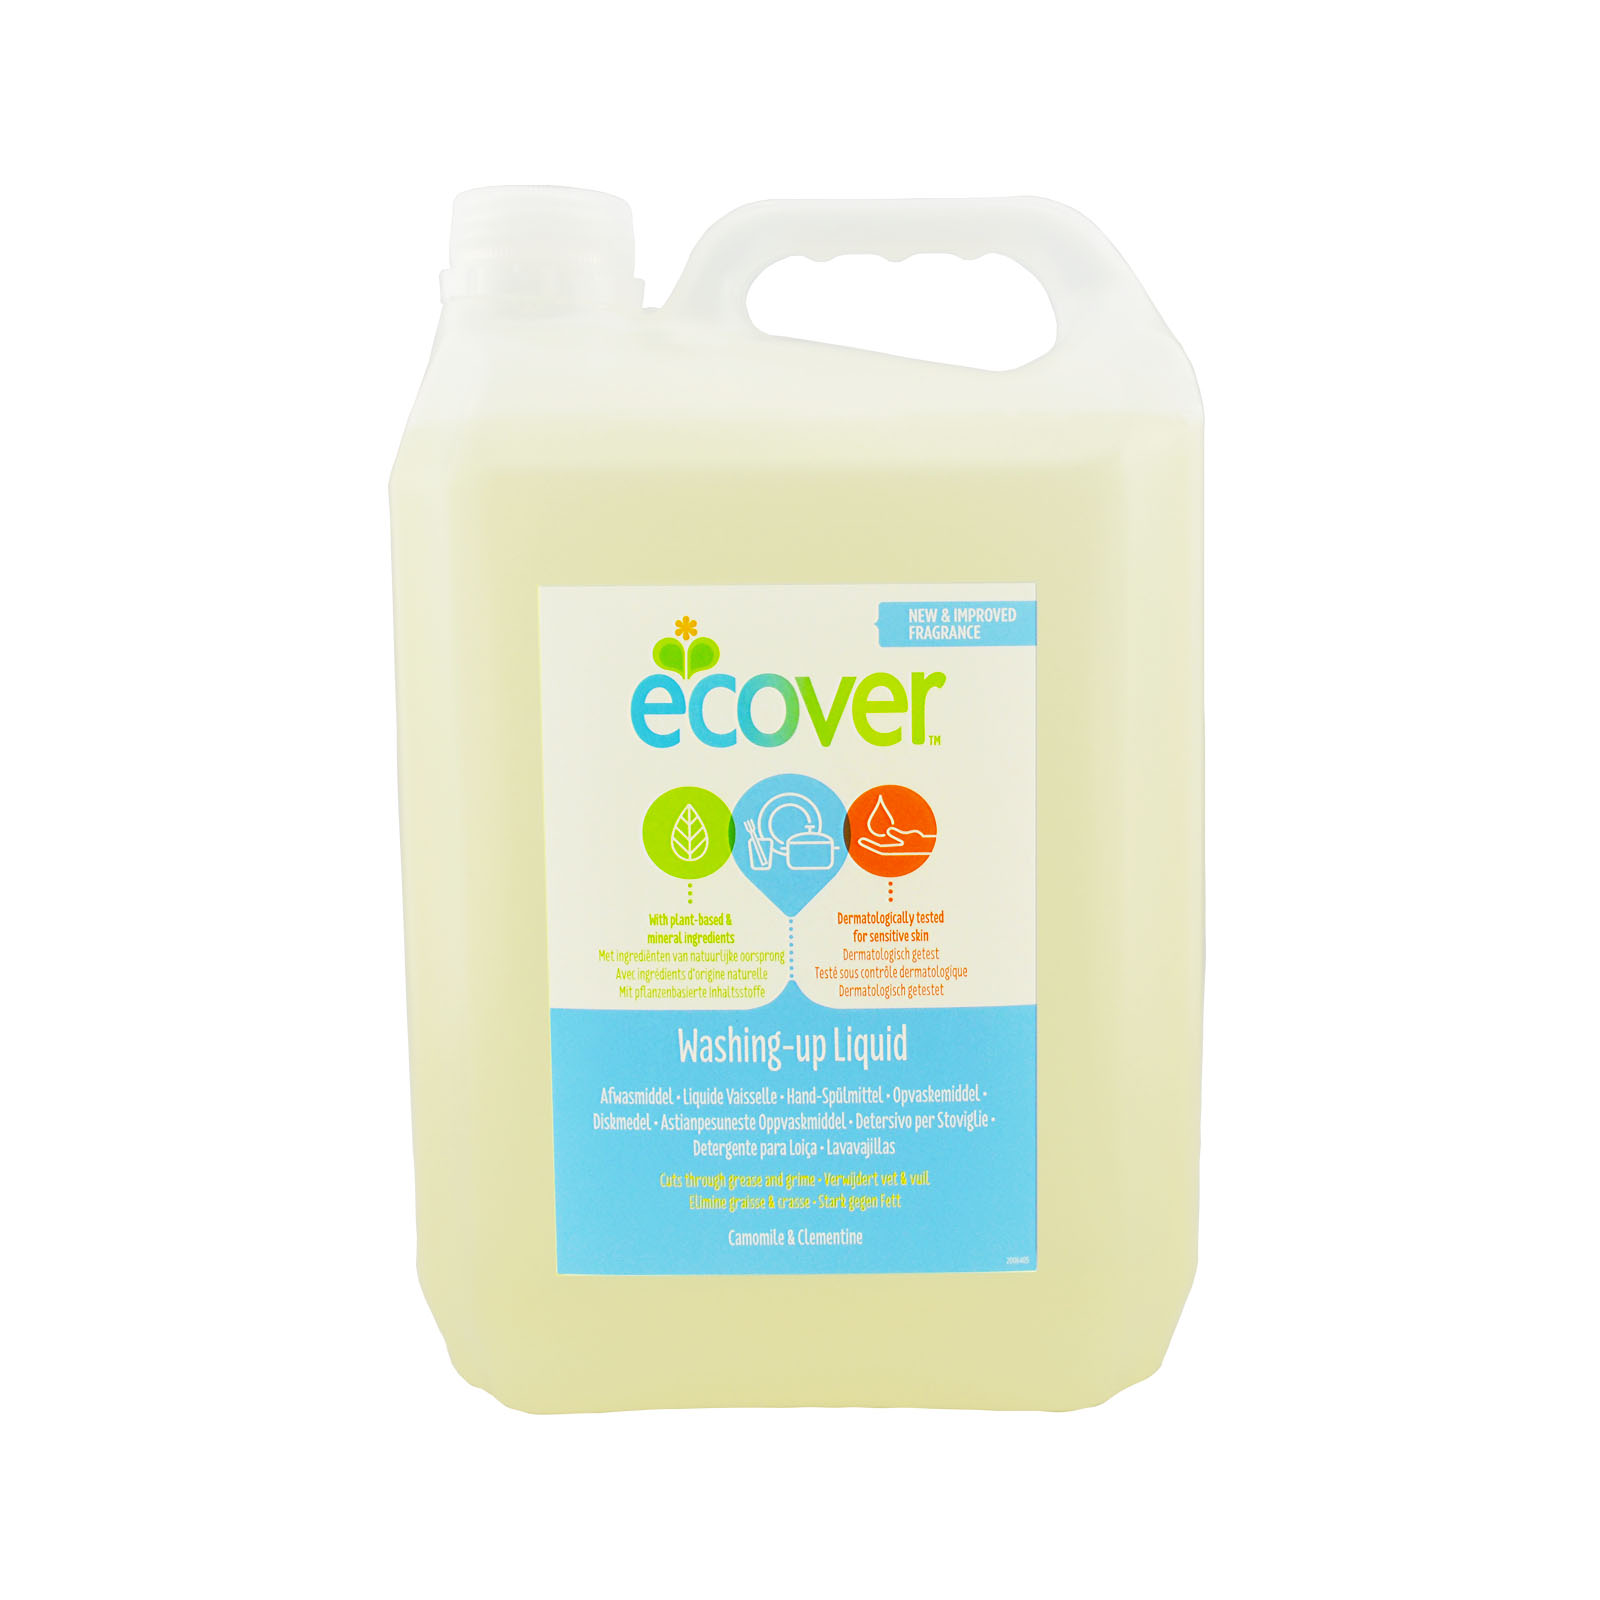 Ecover Washing-up Liquid Refill - Camomile & Clementine (5L)